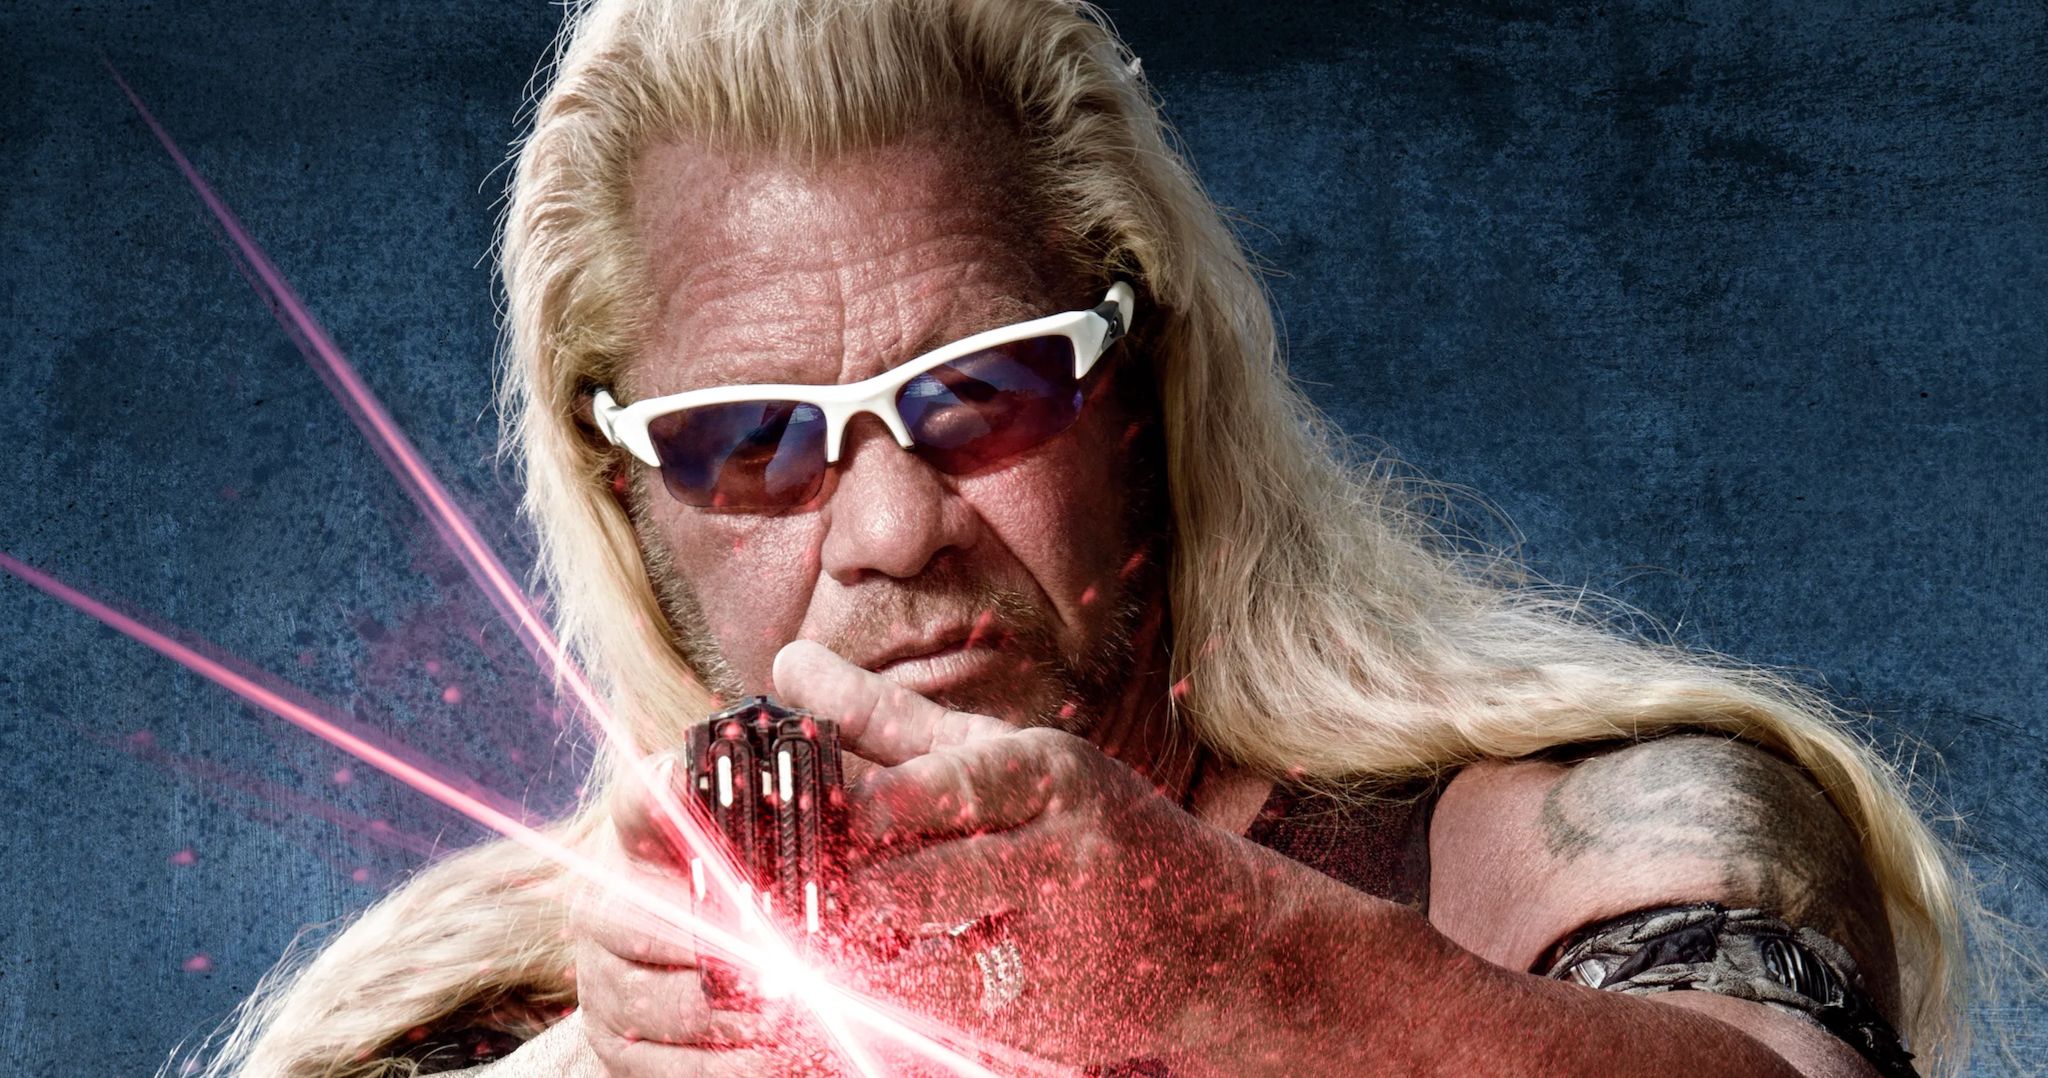 Dog the Bounty Hunter Finds Fresh Campsite as He Closes in on Brian Laundrie